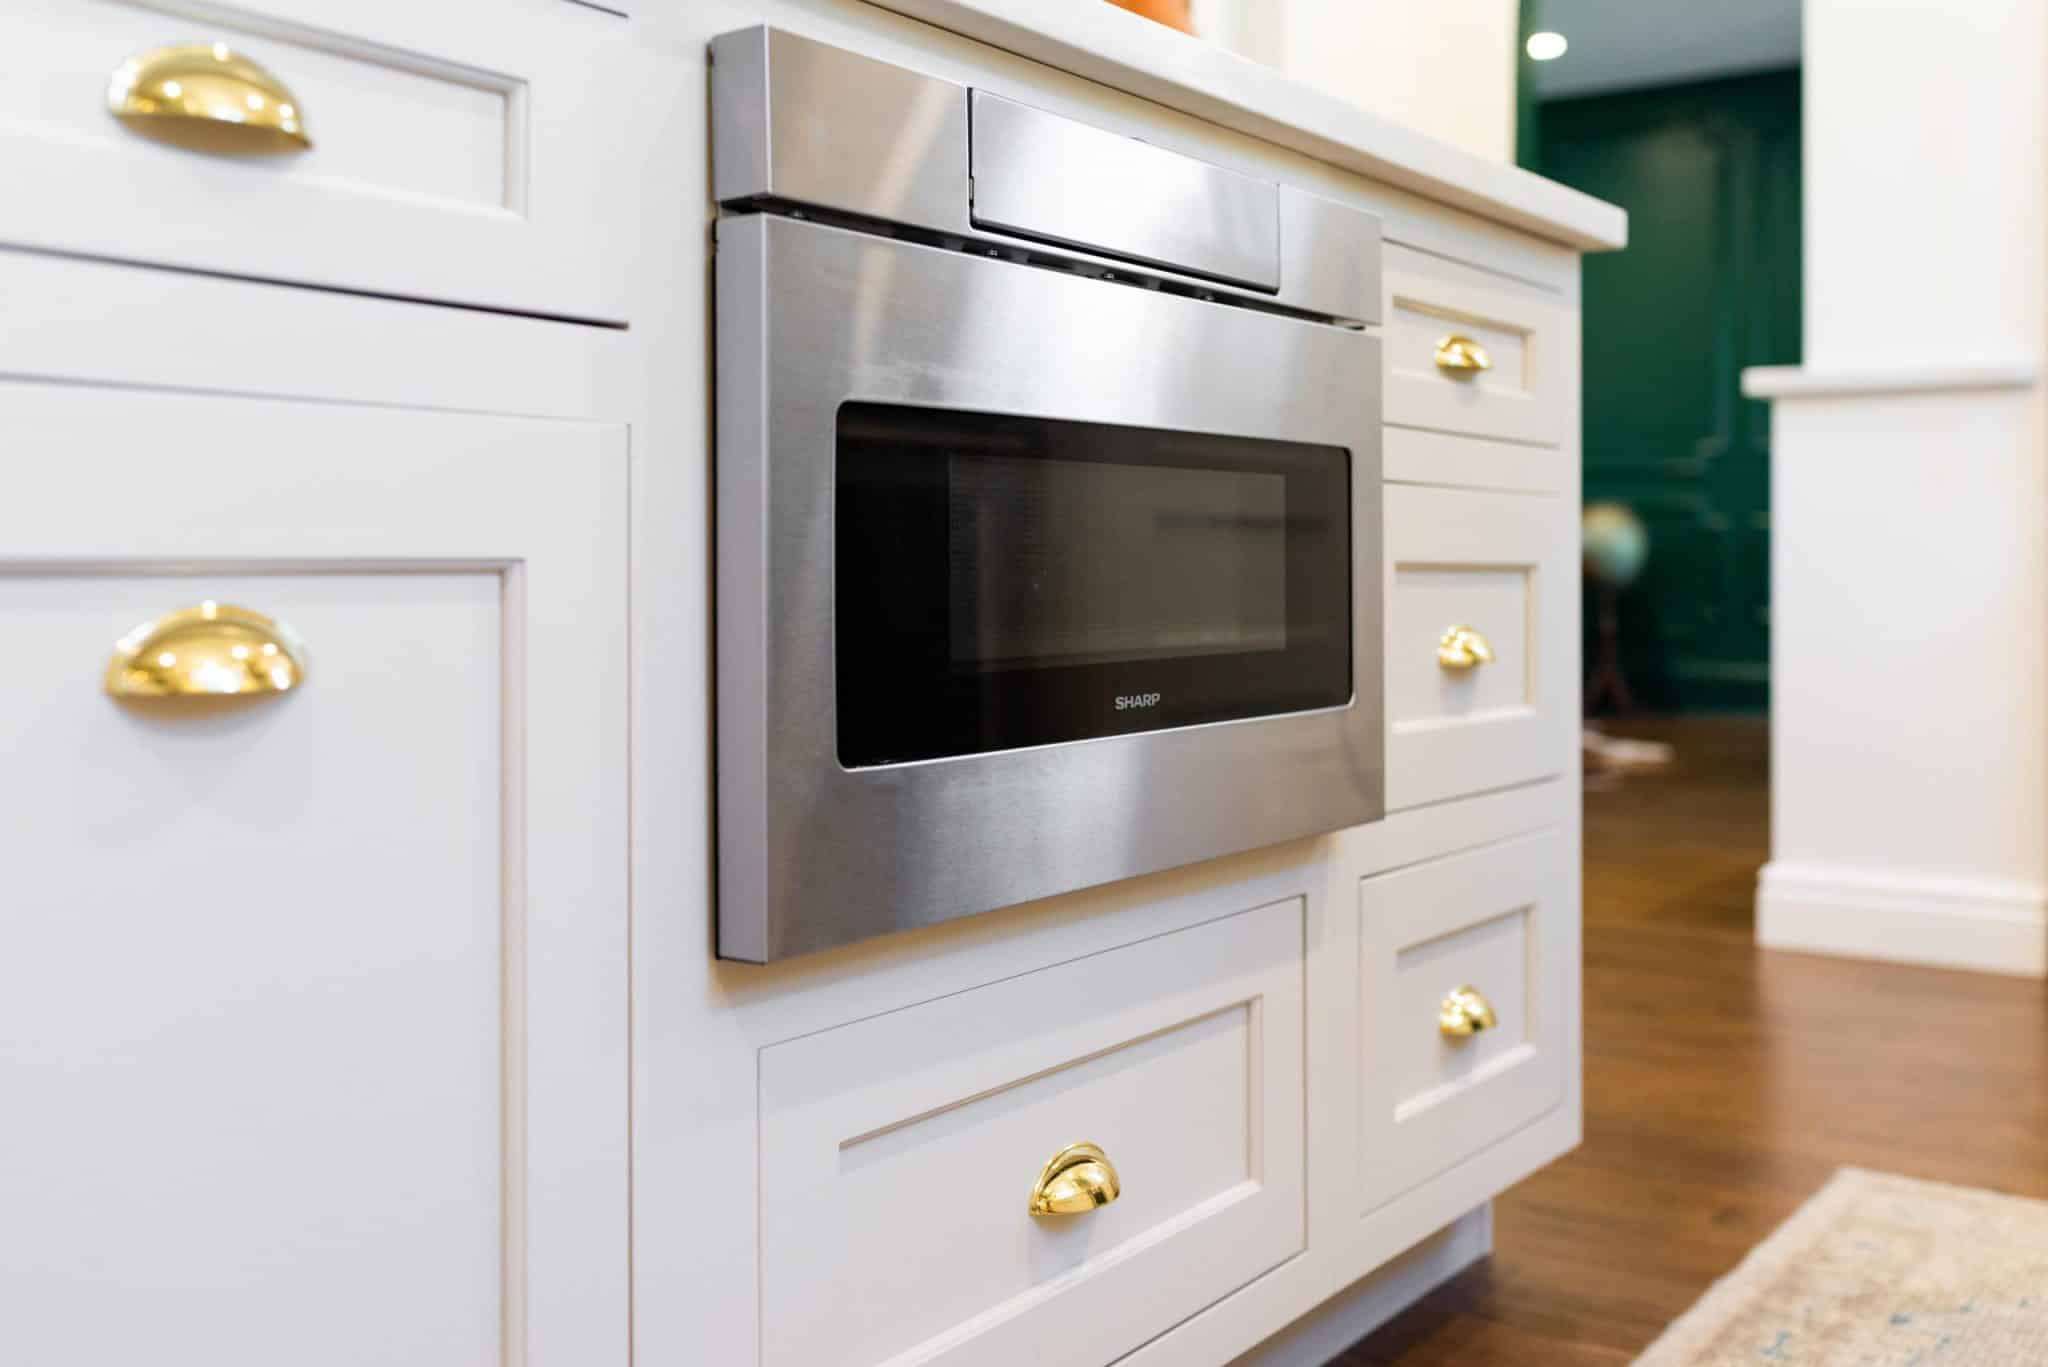 custom cabinetry dream kitchen microwave